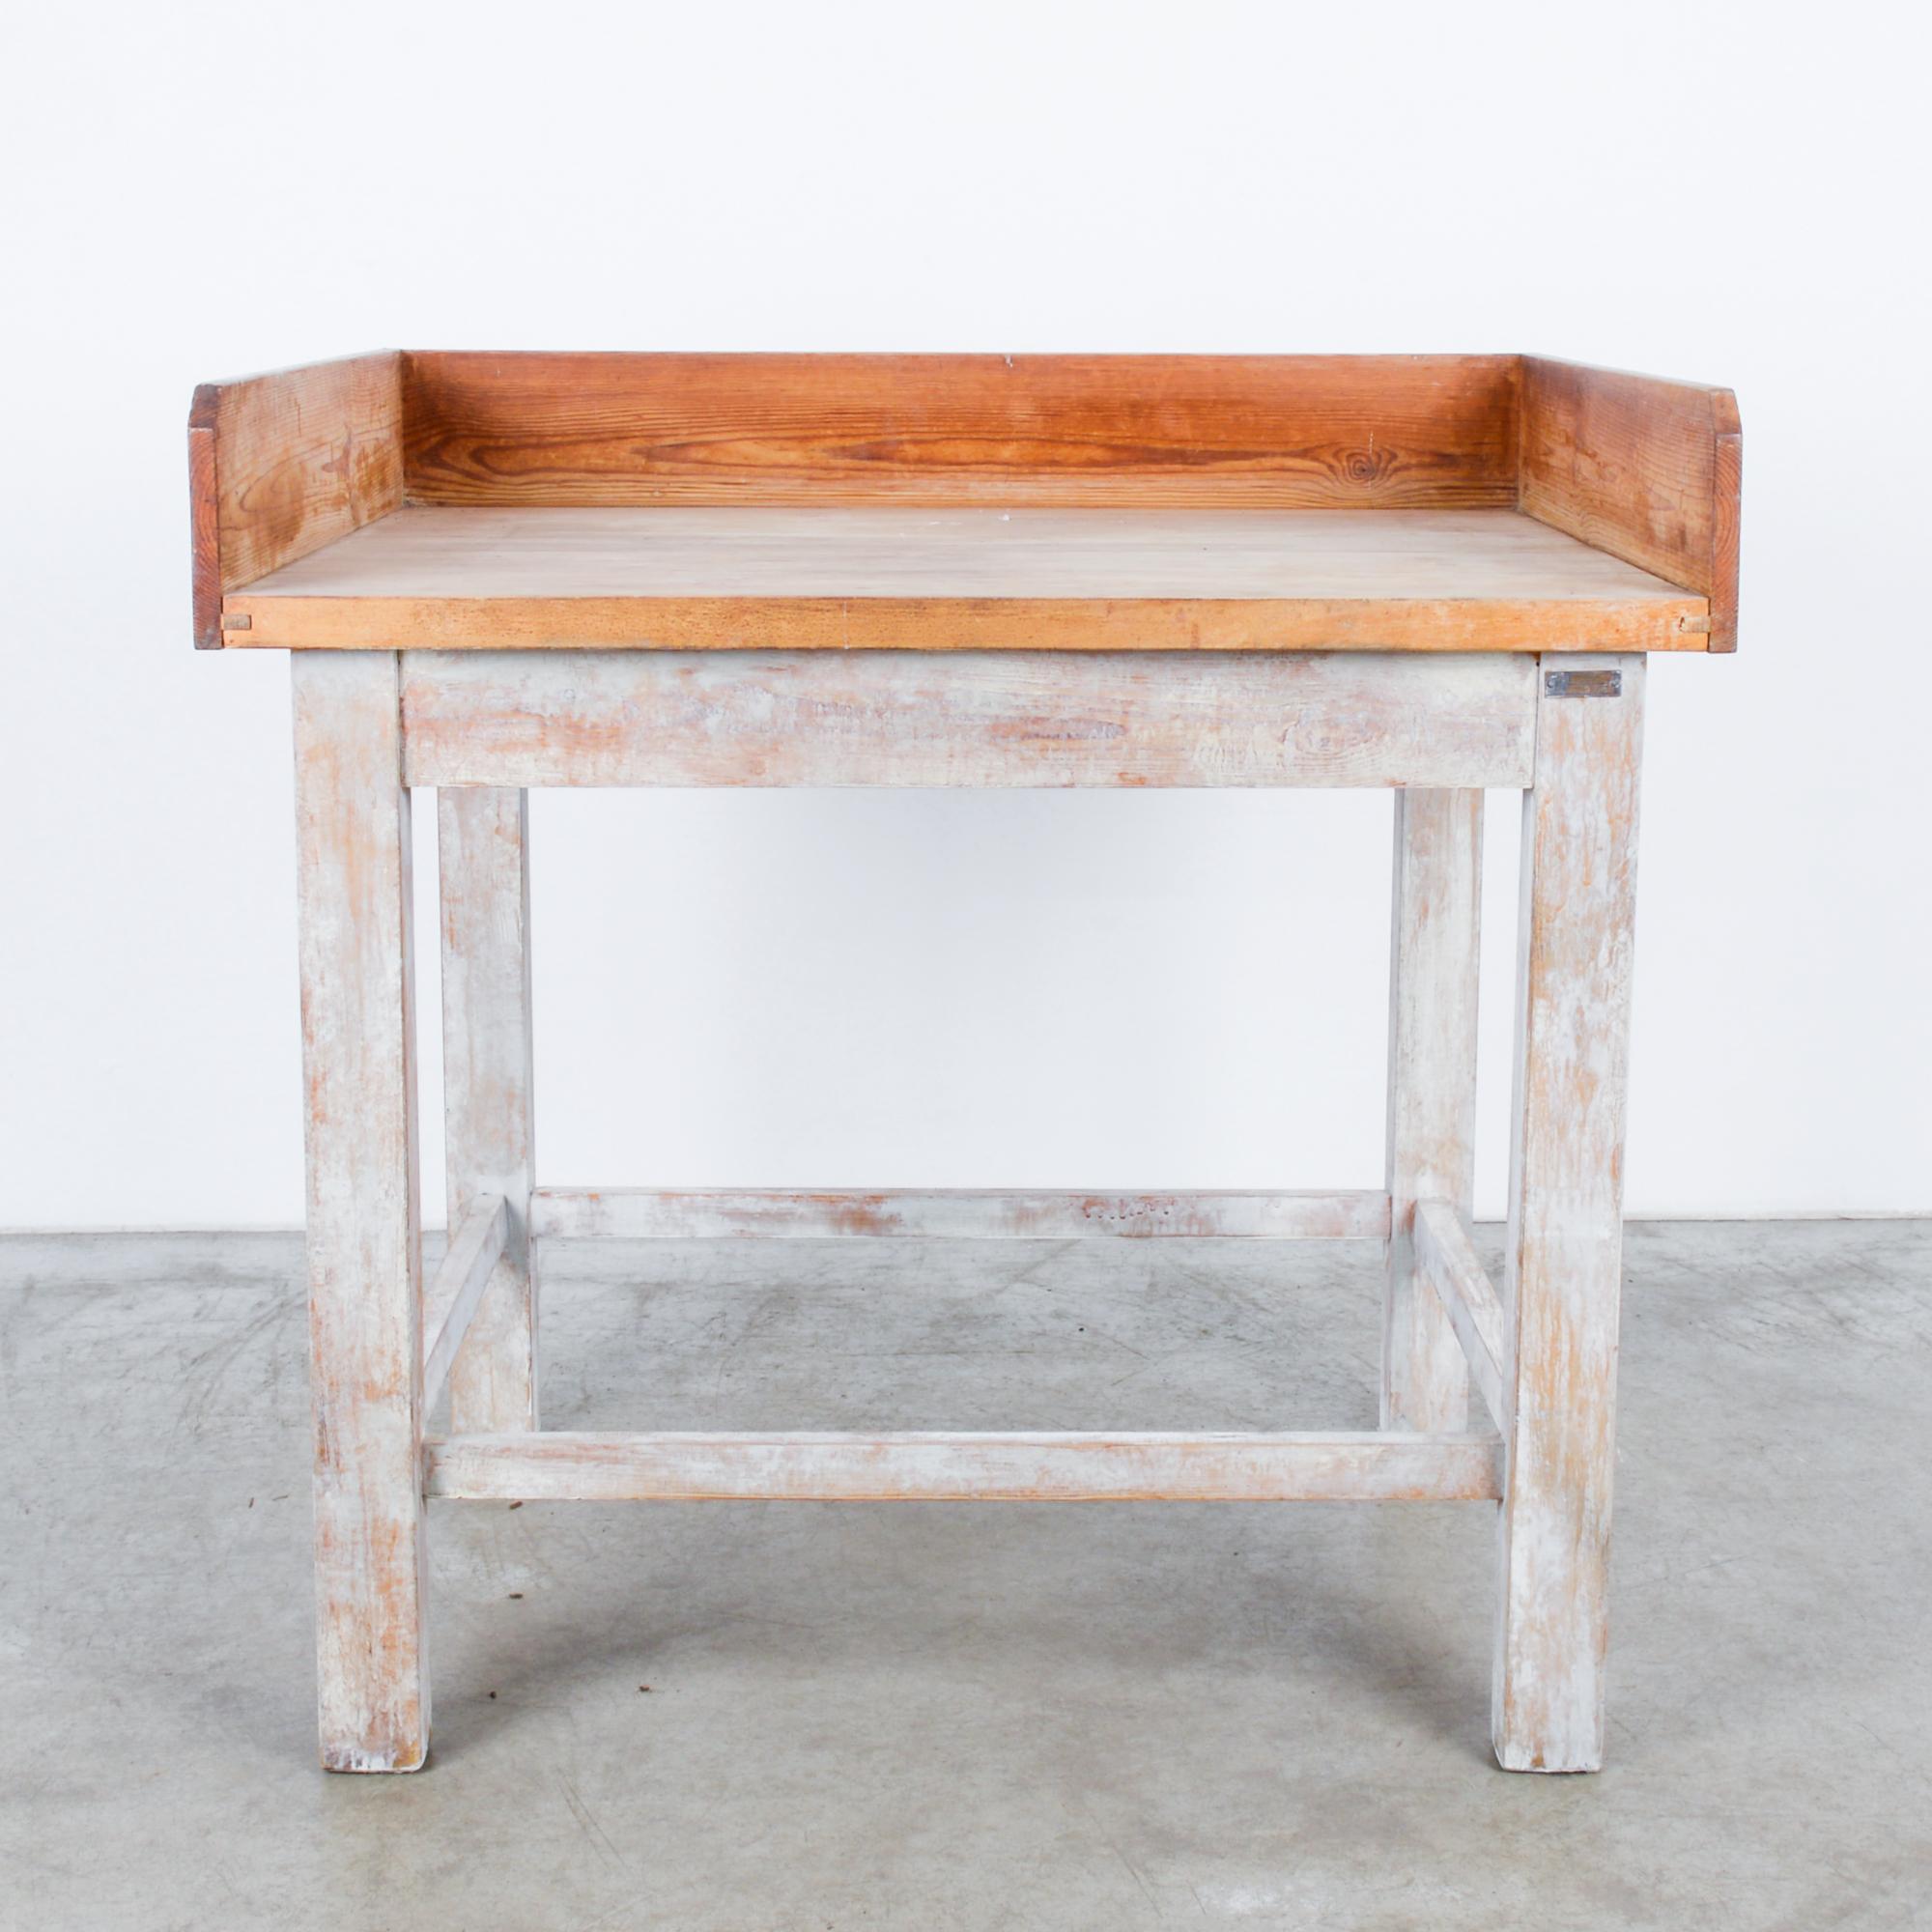 This wooden baker’s table was made in France, circa 1950. The polished wood panels that line the sides and the back keep the flour and baking ingredients on the tabletop. The sturdily constructed frame displays a milky white patina and evokes the